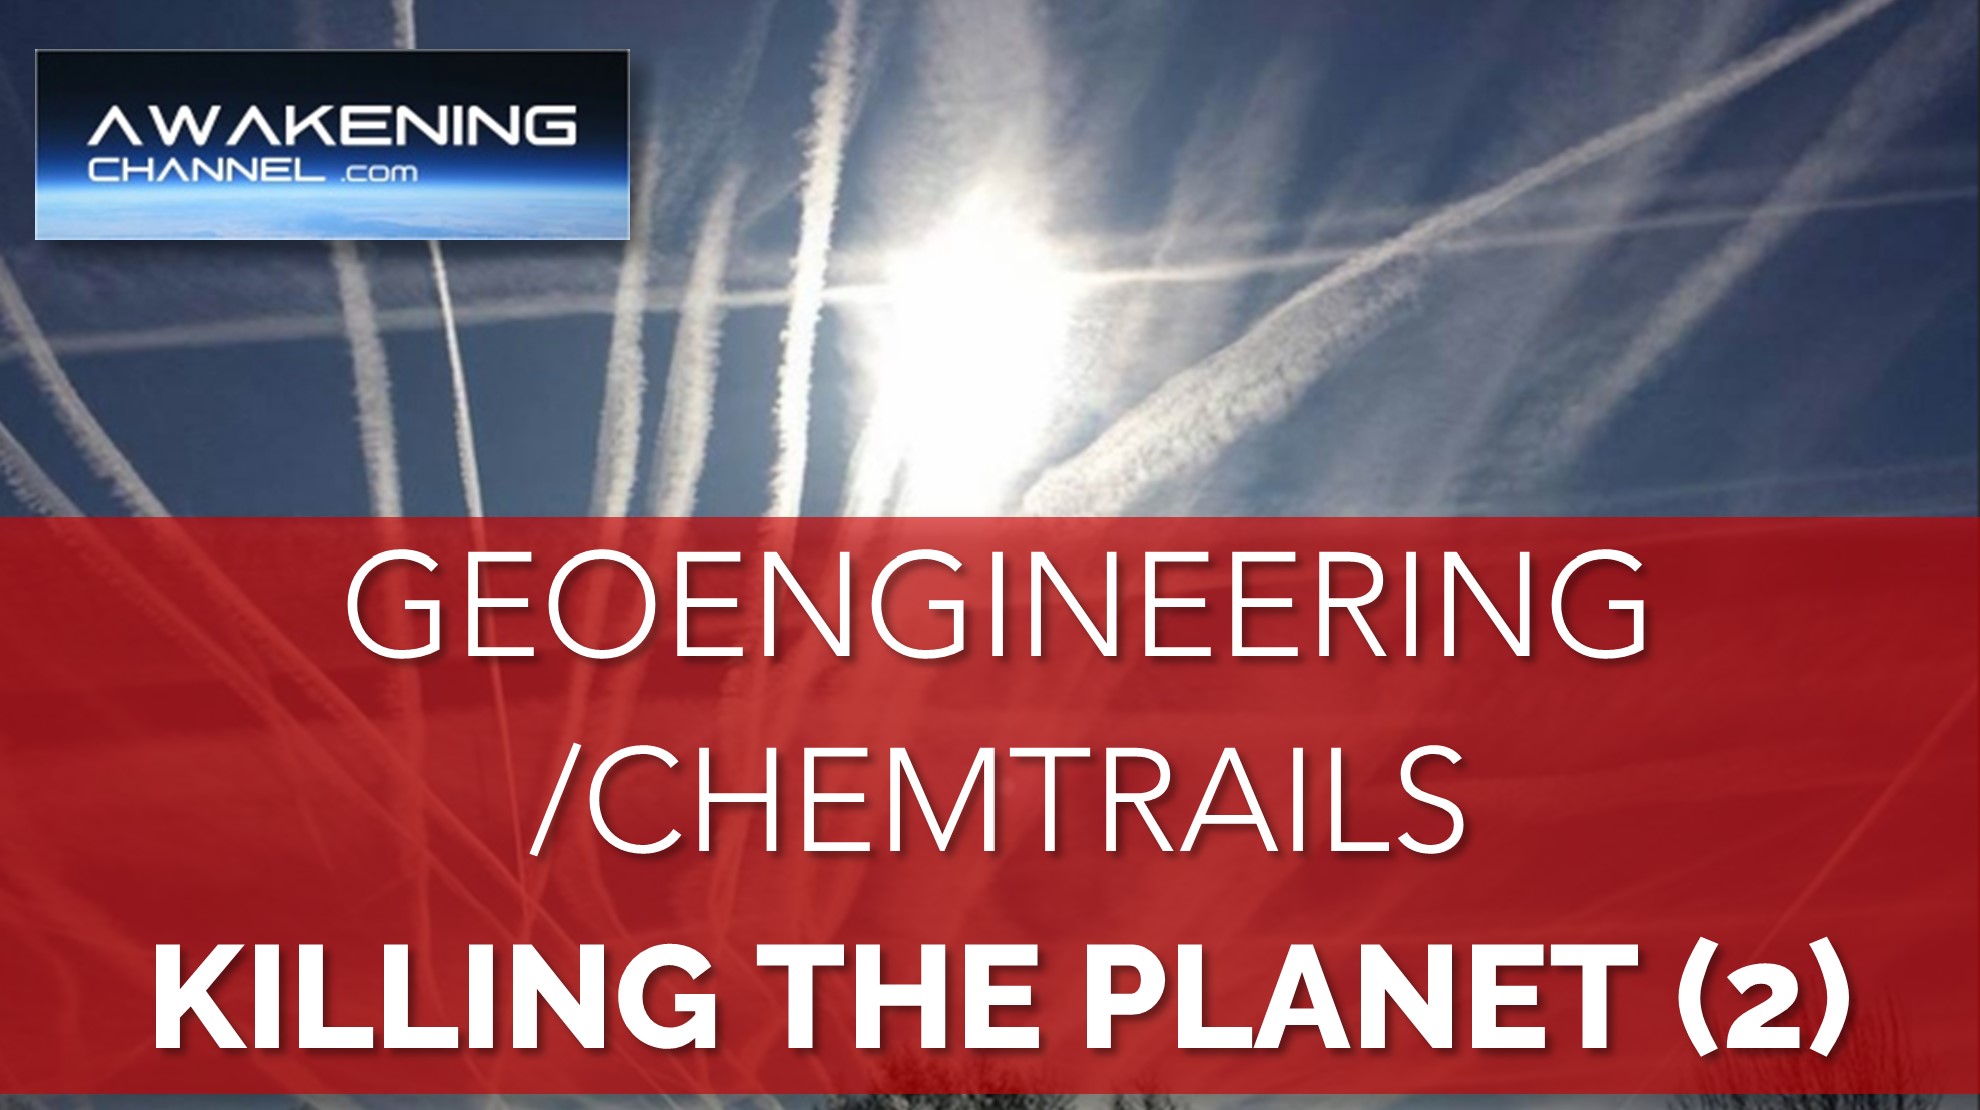 (2) CHEMTRAILS ARE KILLING THE PLANET